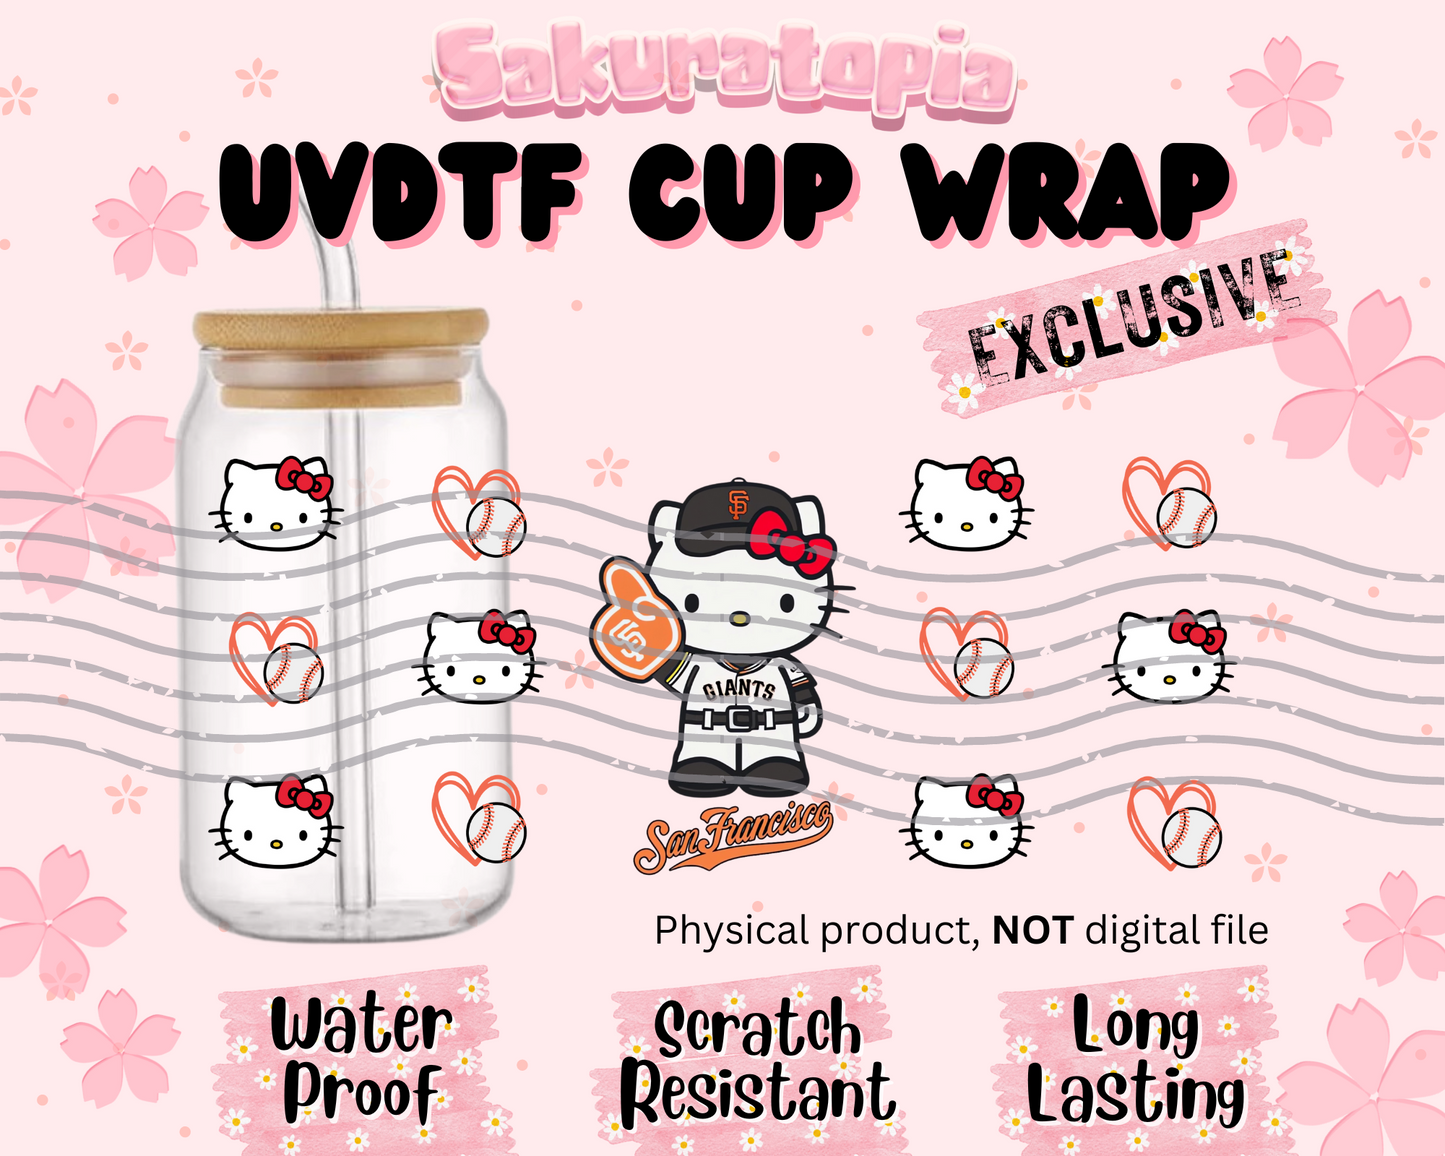 UVDTF HK SF Giant Anime Cup Wrap, Ready to Use Glass Cup UVDTF transfers for Glass Can | Ready to Apply UVDTF wraps for Libbey Glass